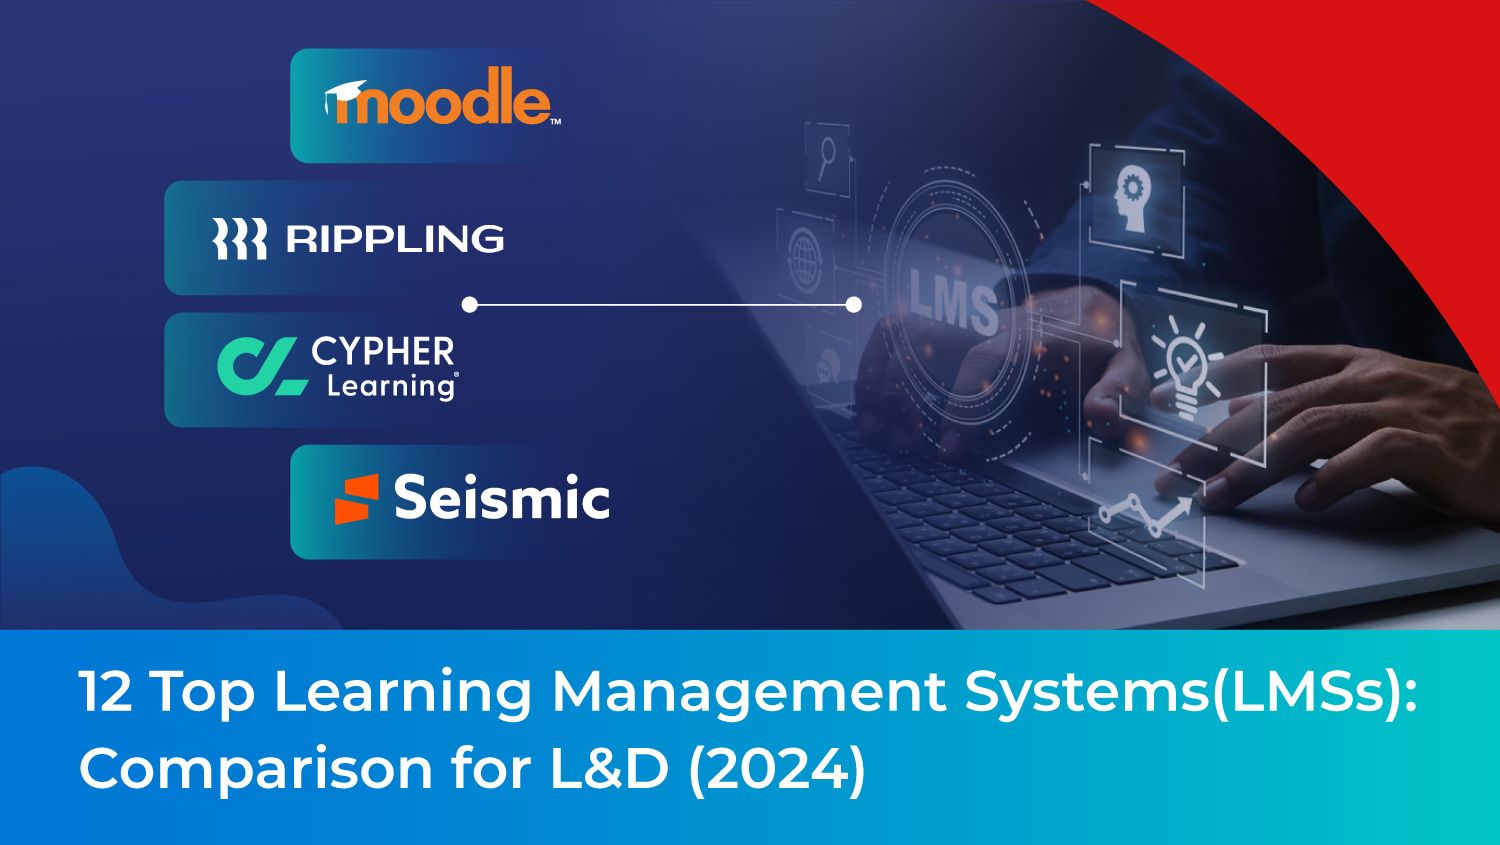 12 Top Learning Management Systems: Comparison for L&D (2024)